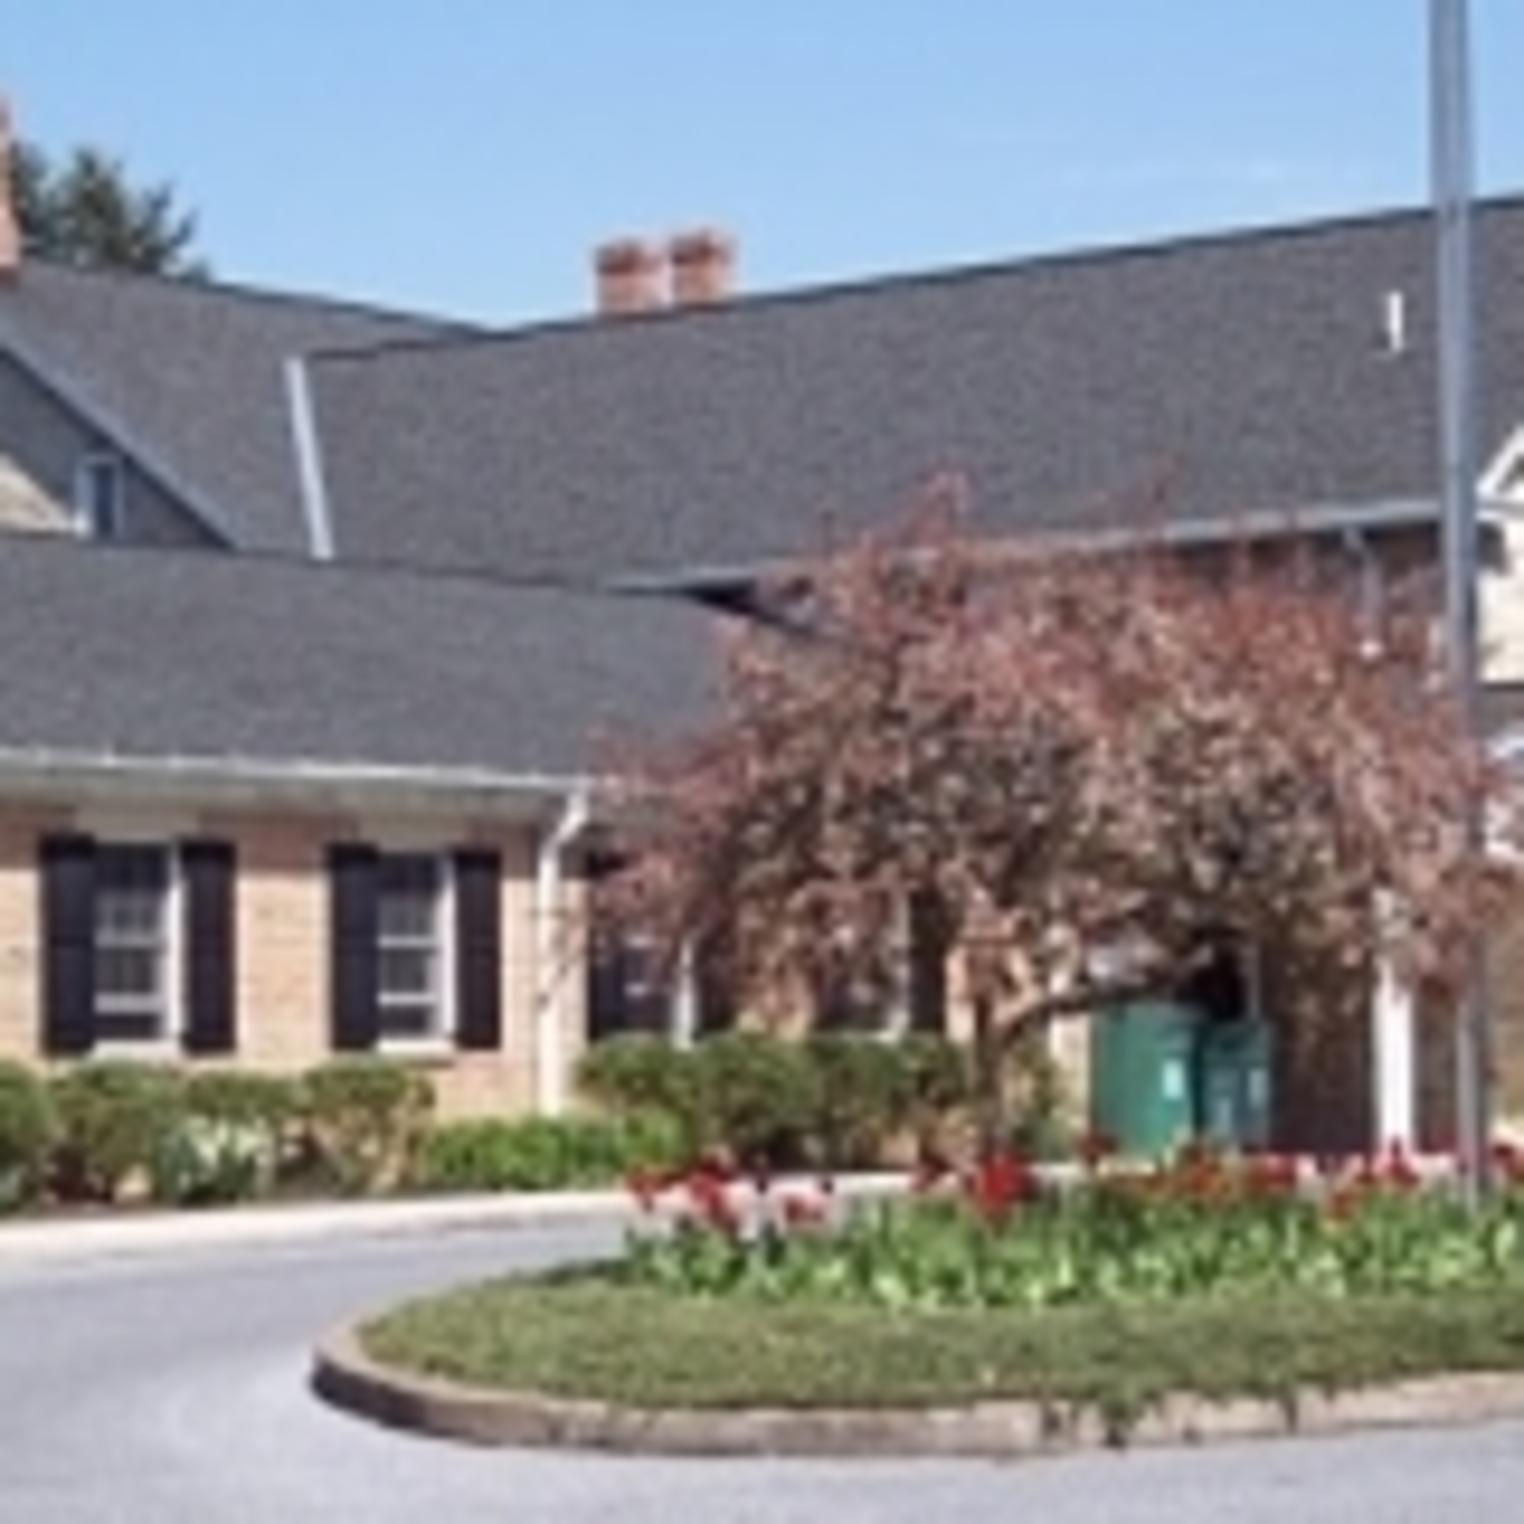 New Cumberland Public Library